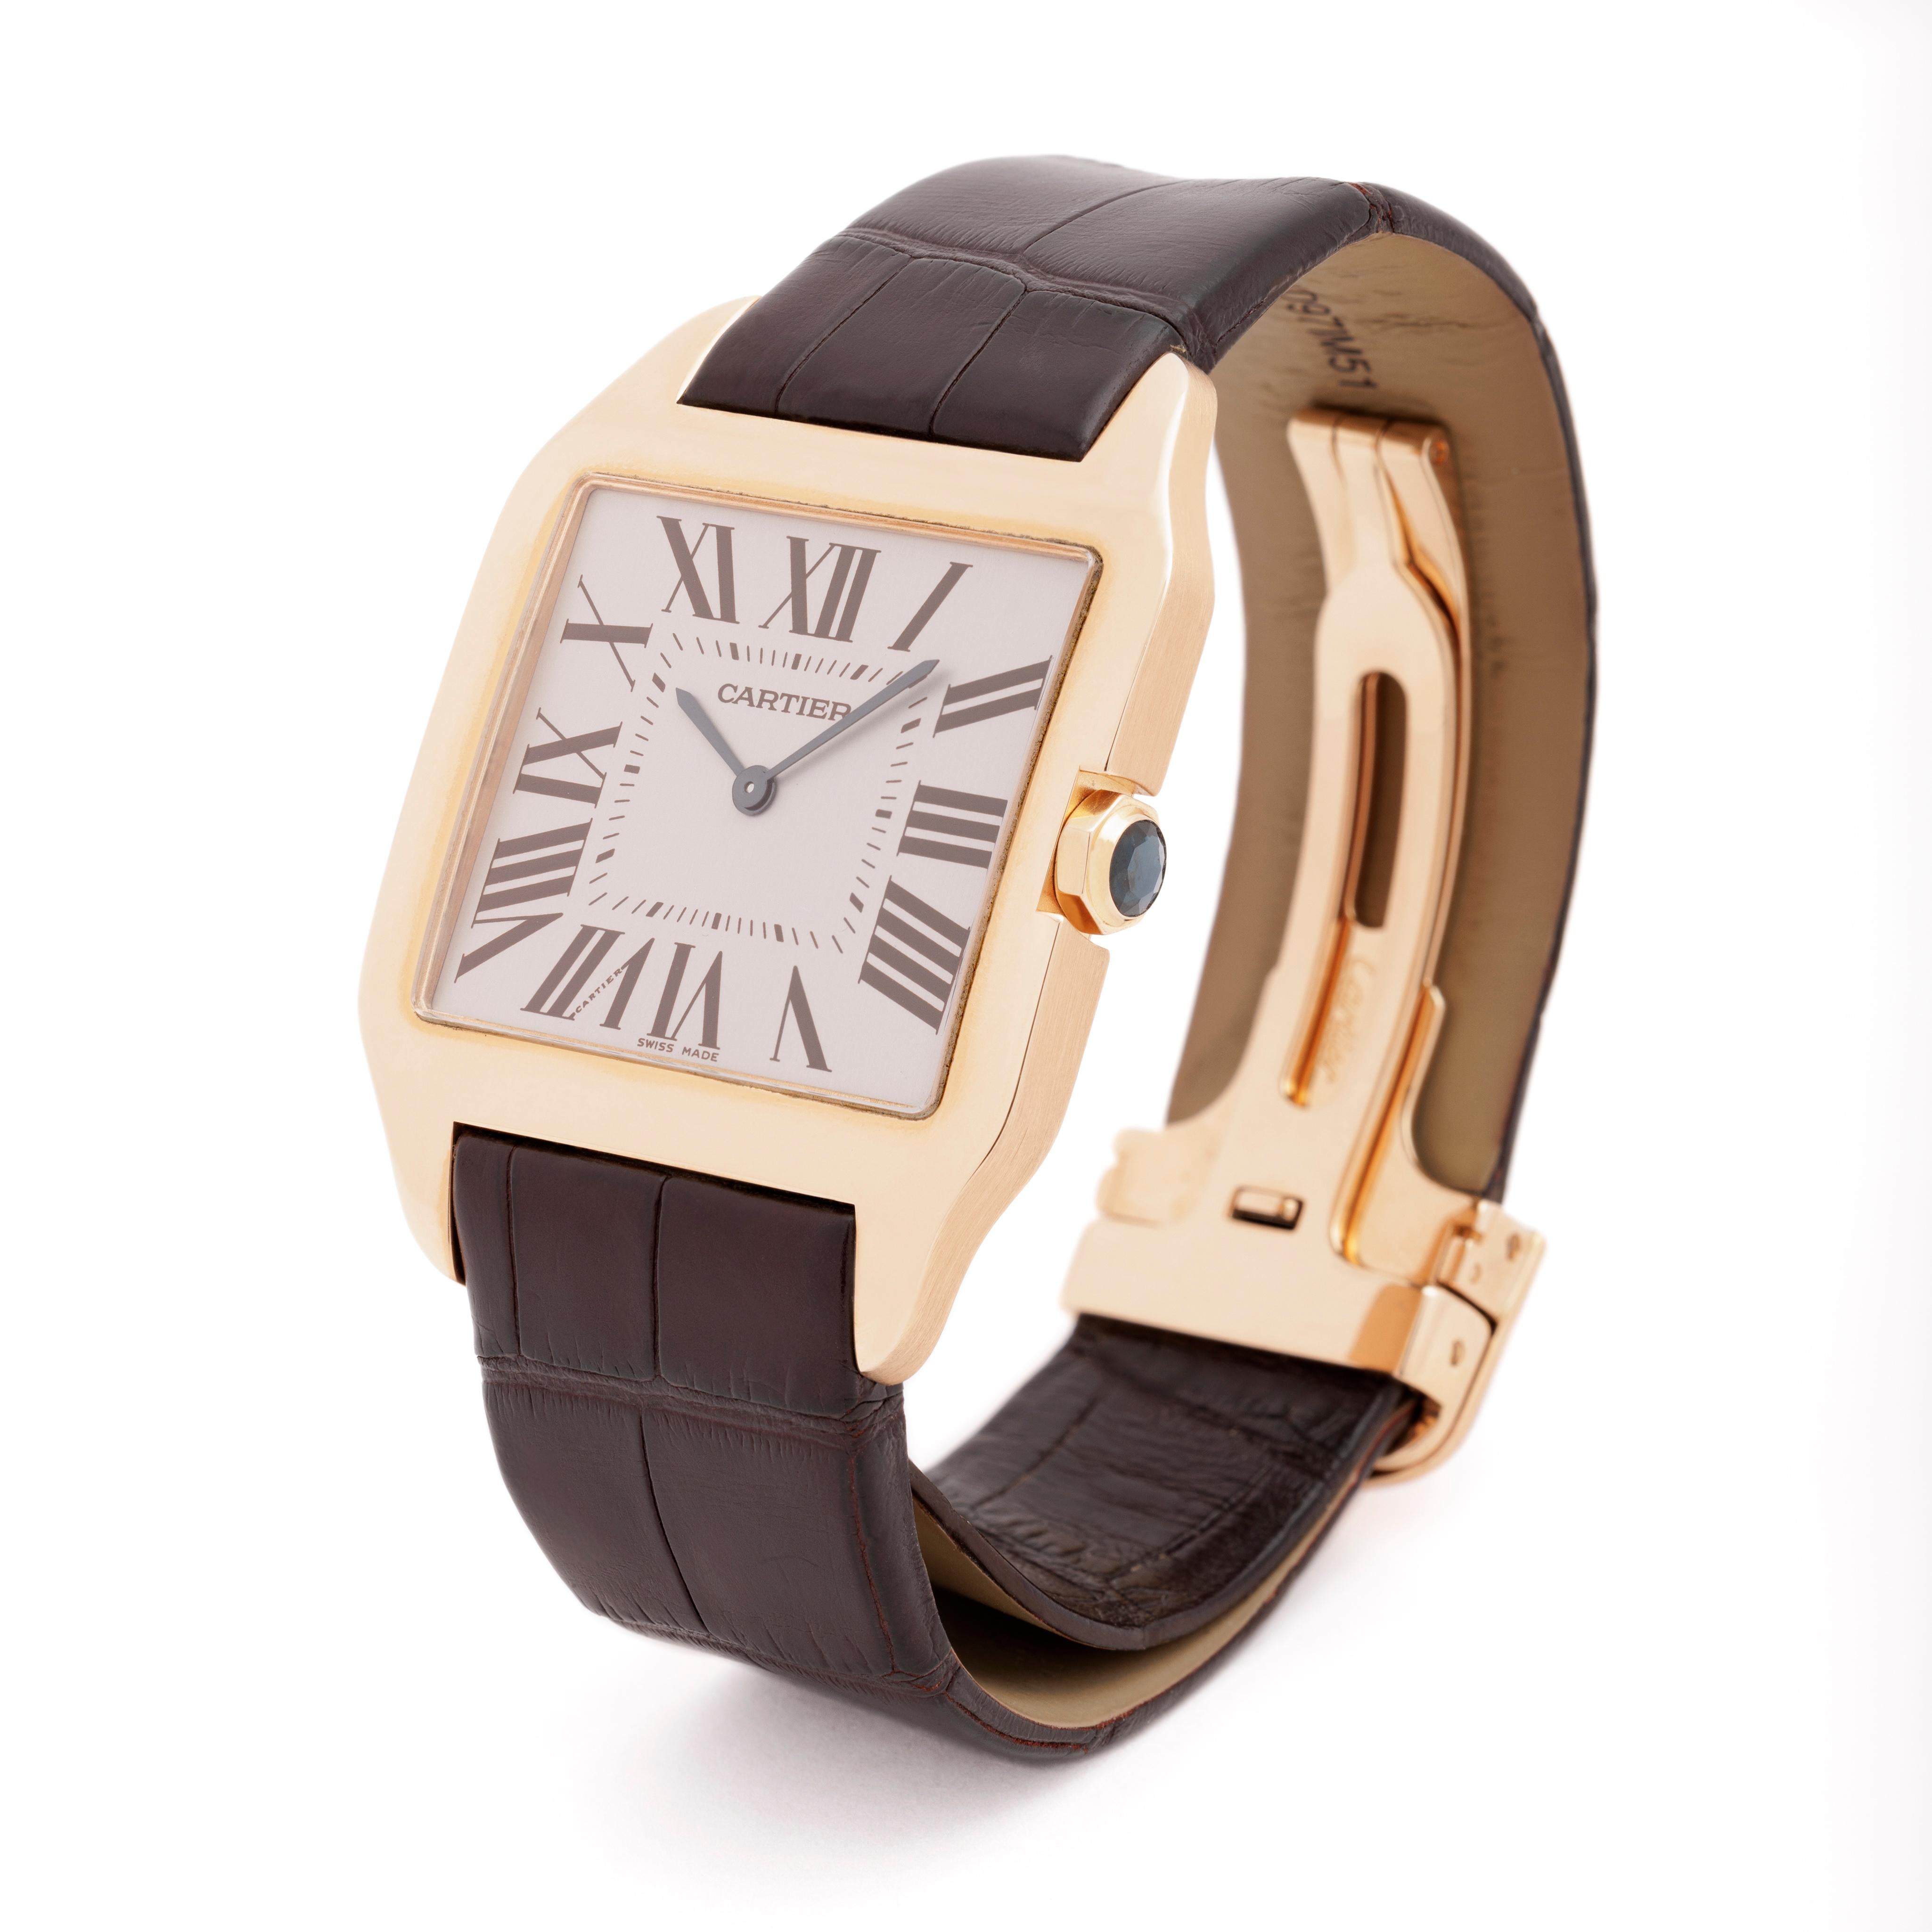 Cartier Santos Dumont 18 Karat Rose Gold Model W2006951 In Excellent Condition For Sale In New York, NY